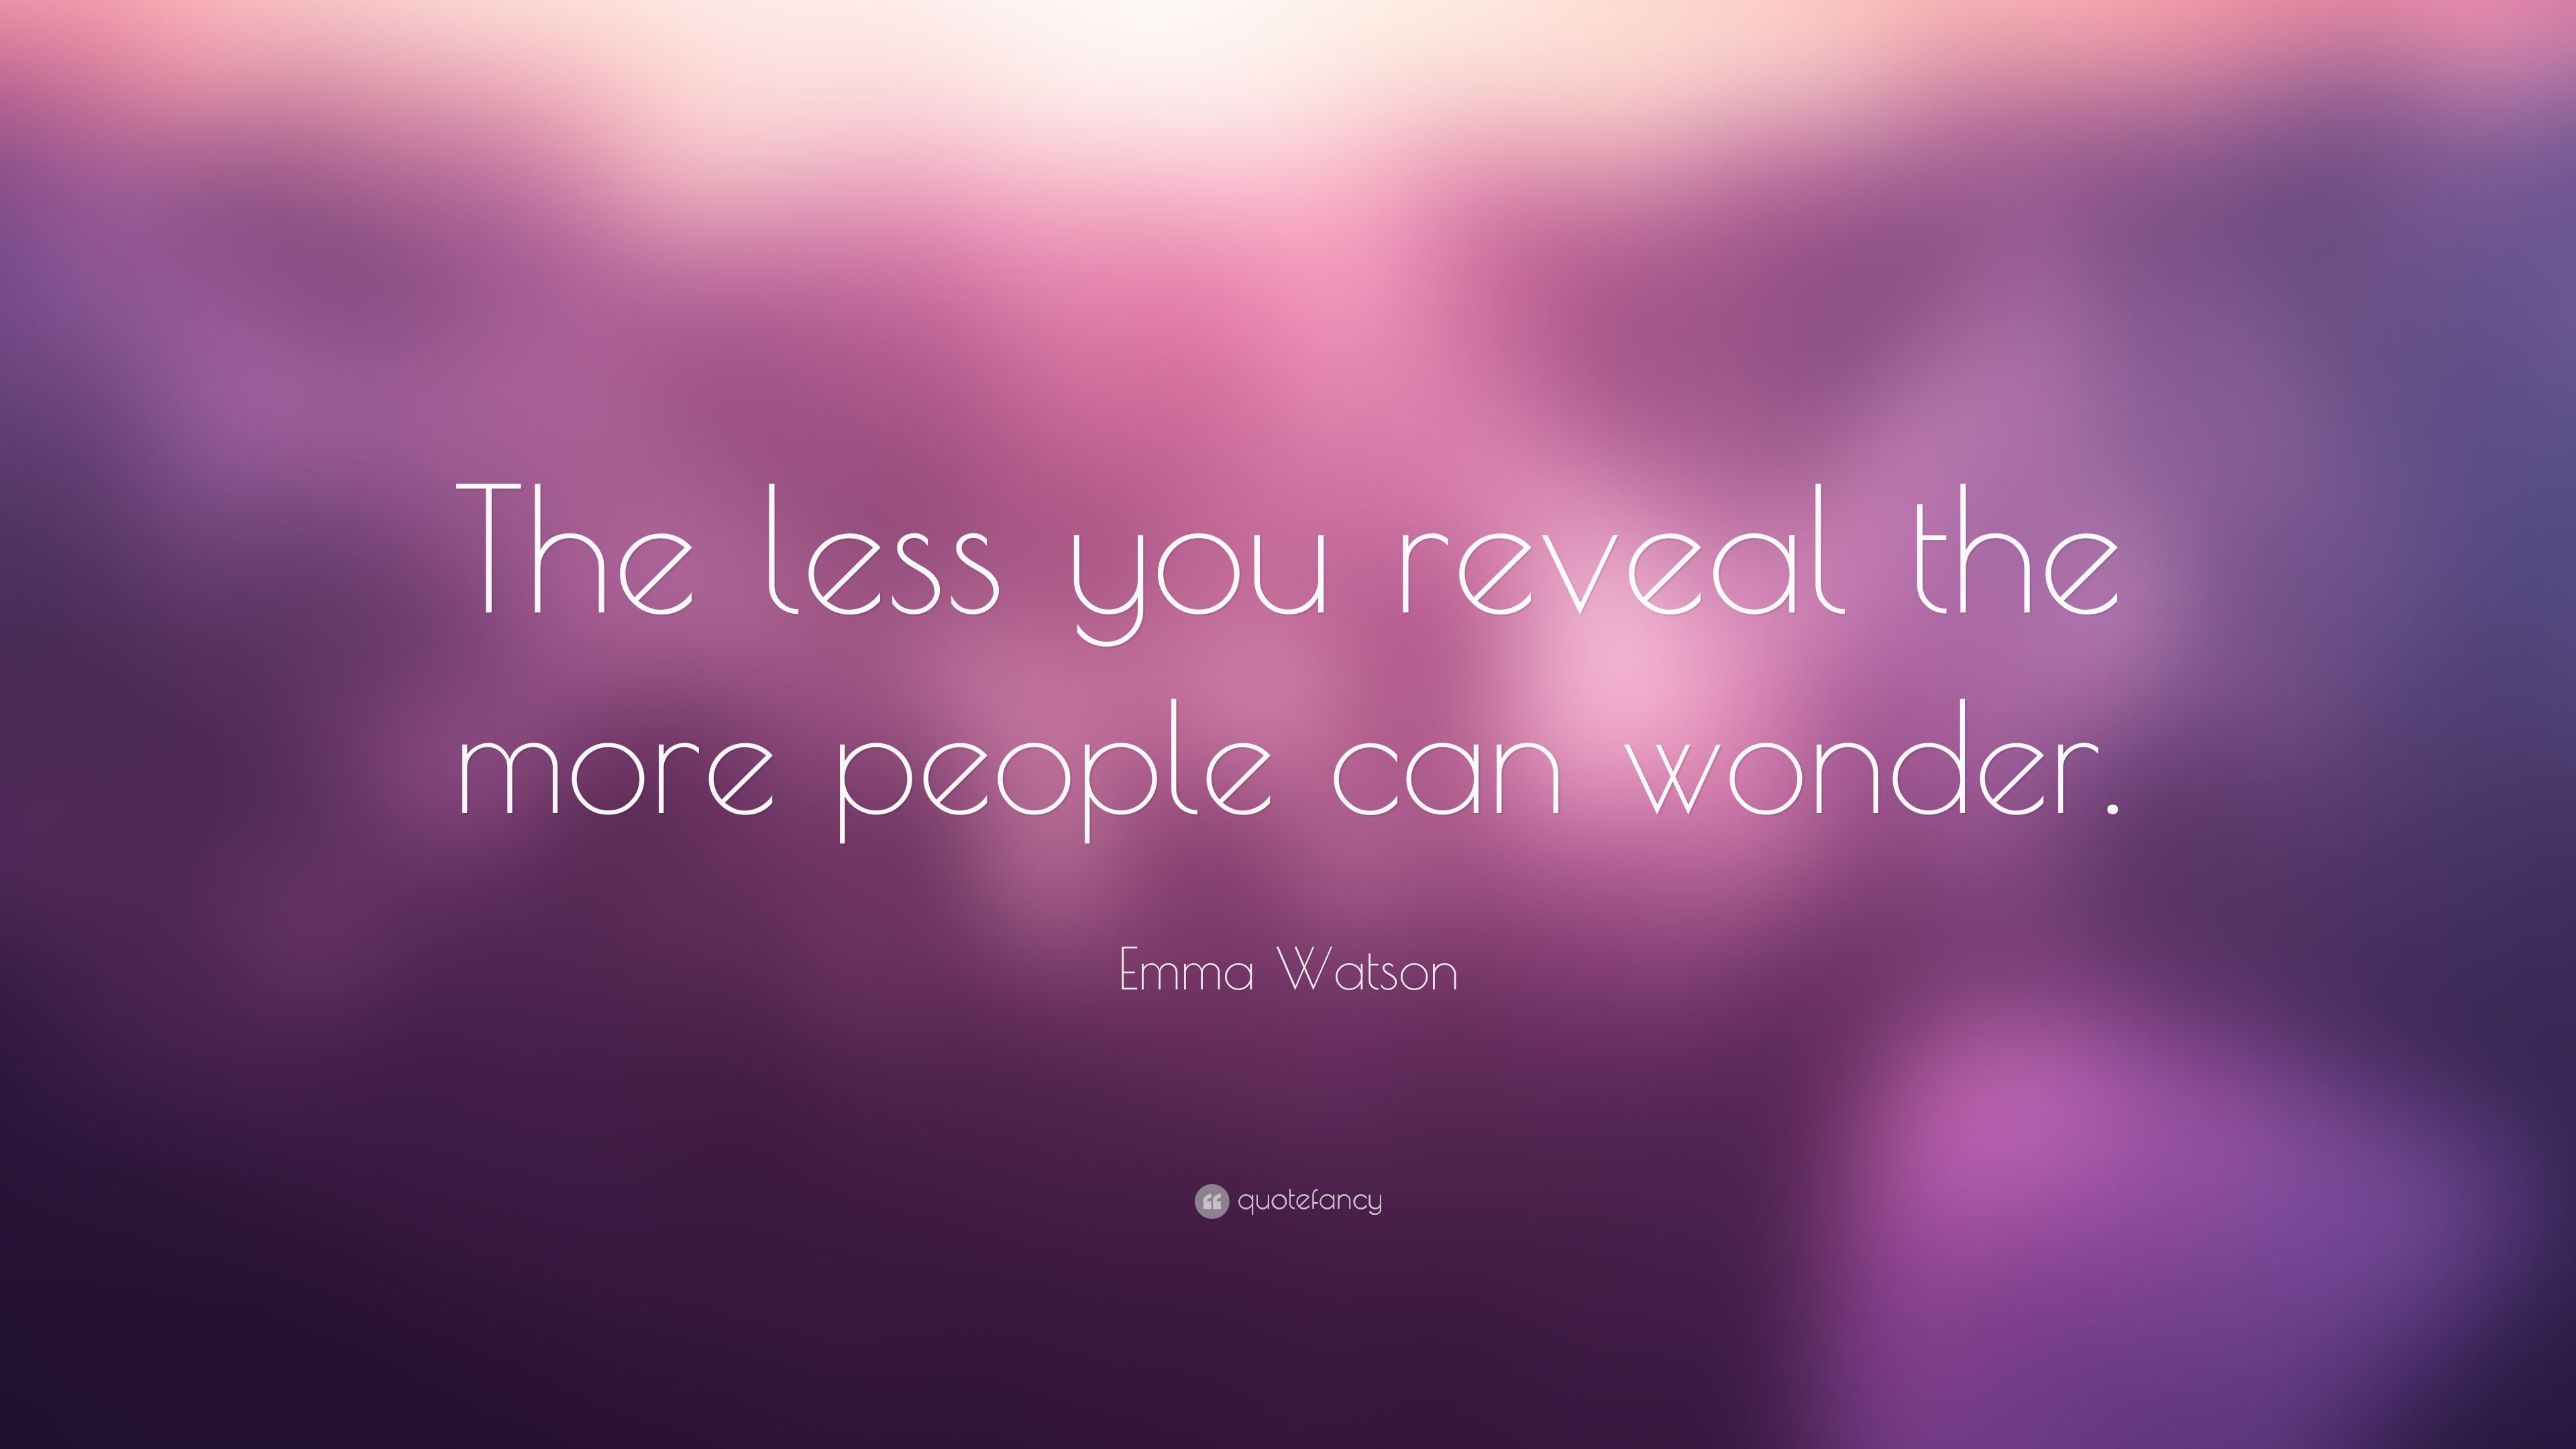 Emma Watson Quote: “The less you reveal the more people can wonder.”